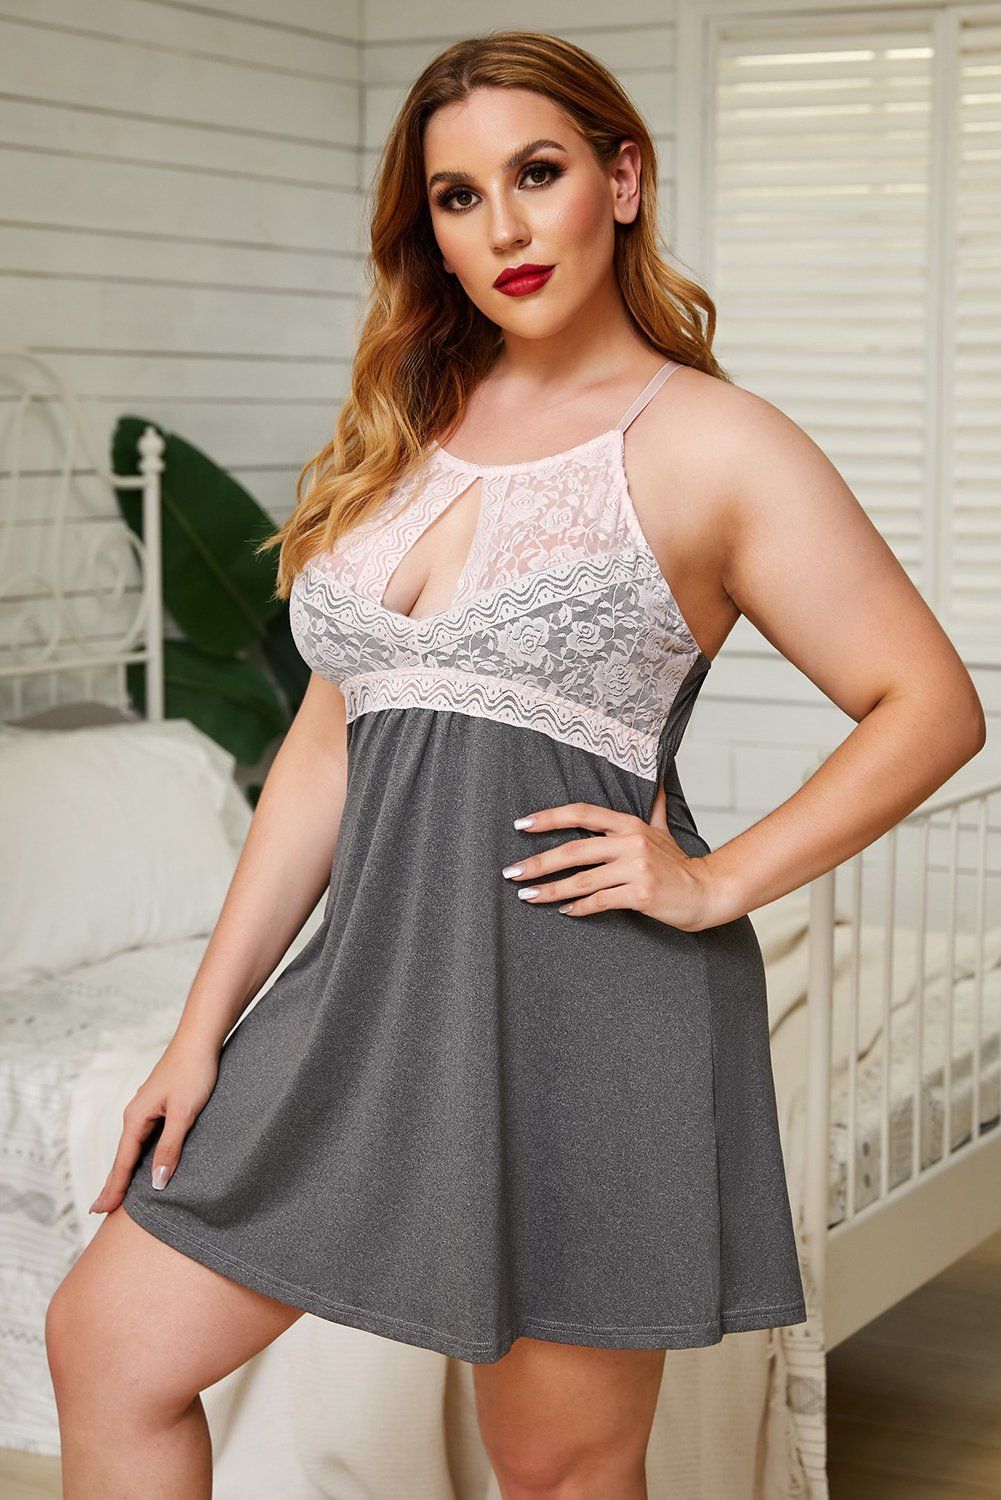 – Womens plus size babydoll with thong in a set
– Adjustable halter straps with o-ring connect on back
– Floral lace bust overlay with refined keyhole front
– Exclusive design for bedroom, cosplay, stage and so on
– Plus size lingerie great for your joyful romantic times

Size Chart (CM)
Sizes	Bust	Waist	Length
	Relax	Relax	Relax
1X	96	82	77
2X	103	89	79
3X	110	96	81
4X	117	103	83
5X	124	110	85
Elasticity	High

Note:
1.There maybe 1-2 cm deviation in different sizes, locations and stretch of fabrics. Size chart is for reference only, there may be a little difference with what you get.
2.There are 3 kinds of elasticity: High Elasticity (two-sided stretched), Medium Elasticity (one-sided stretched) and Nonelastic (can not stretched ).
3.Color may be lighter or darker due to the different PC display.
4.Wash it by hand in 30-degree water, hang to dry in shade, prohibit bleaching.
5.There maybe a slightly difference on detail and pattern of this dress.